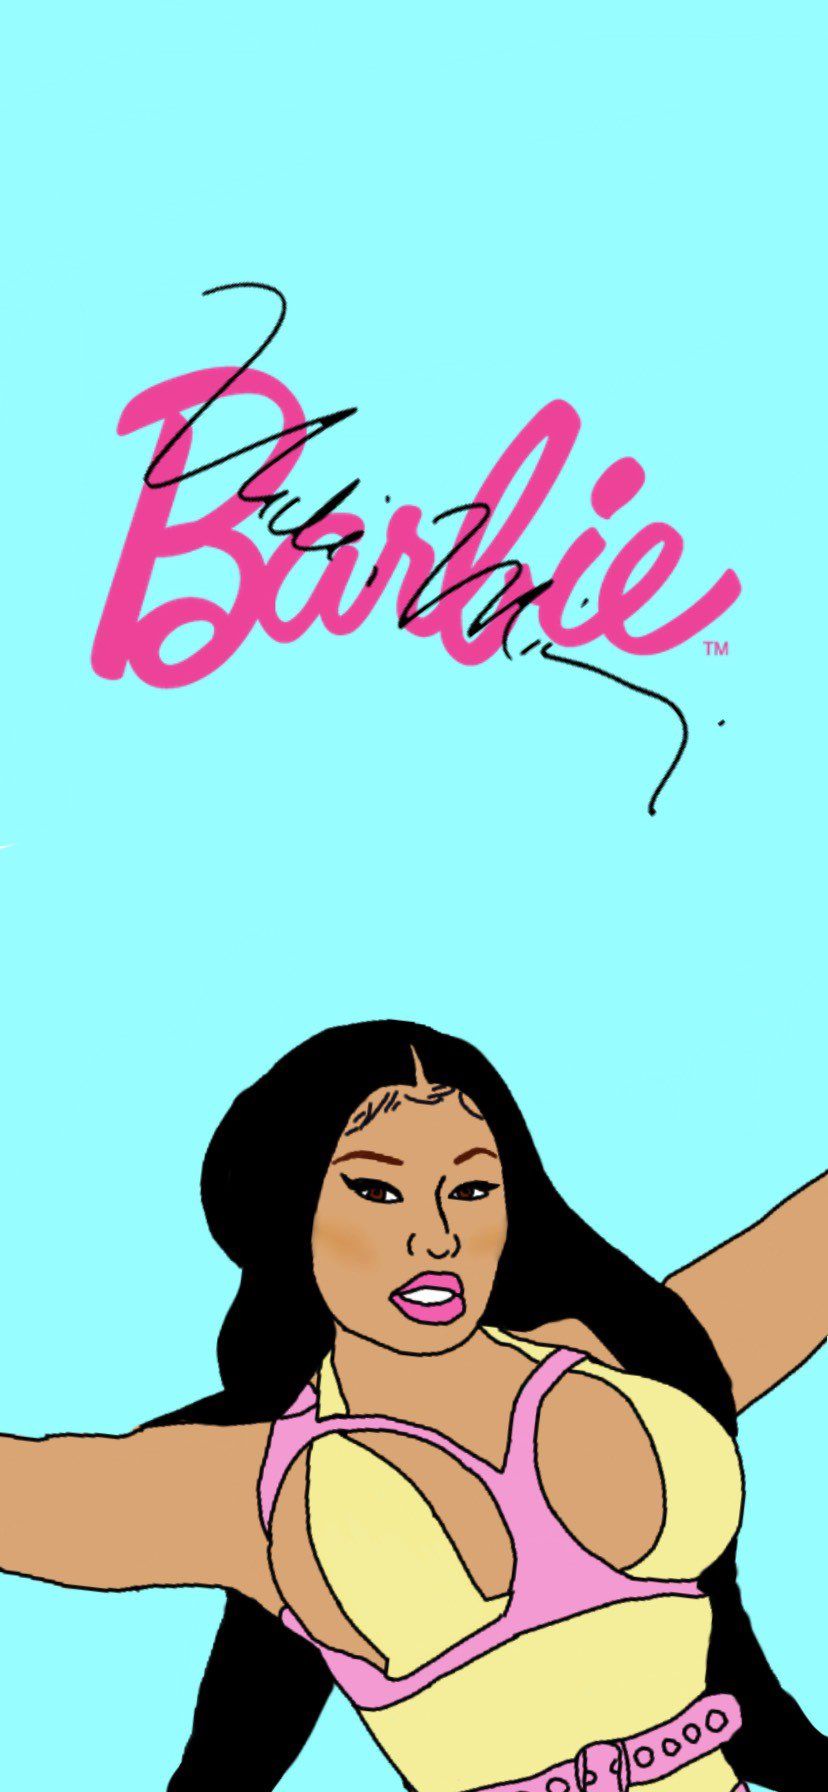 The barbie cartoon character is shown in a blue background - Barbie